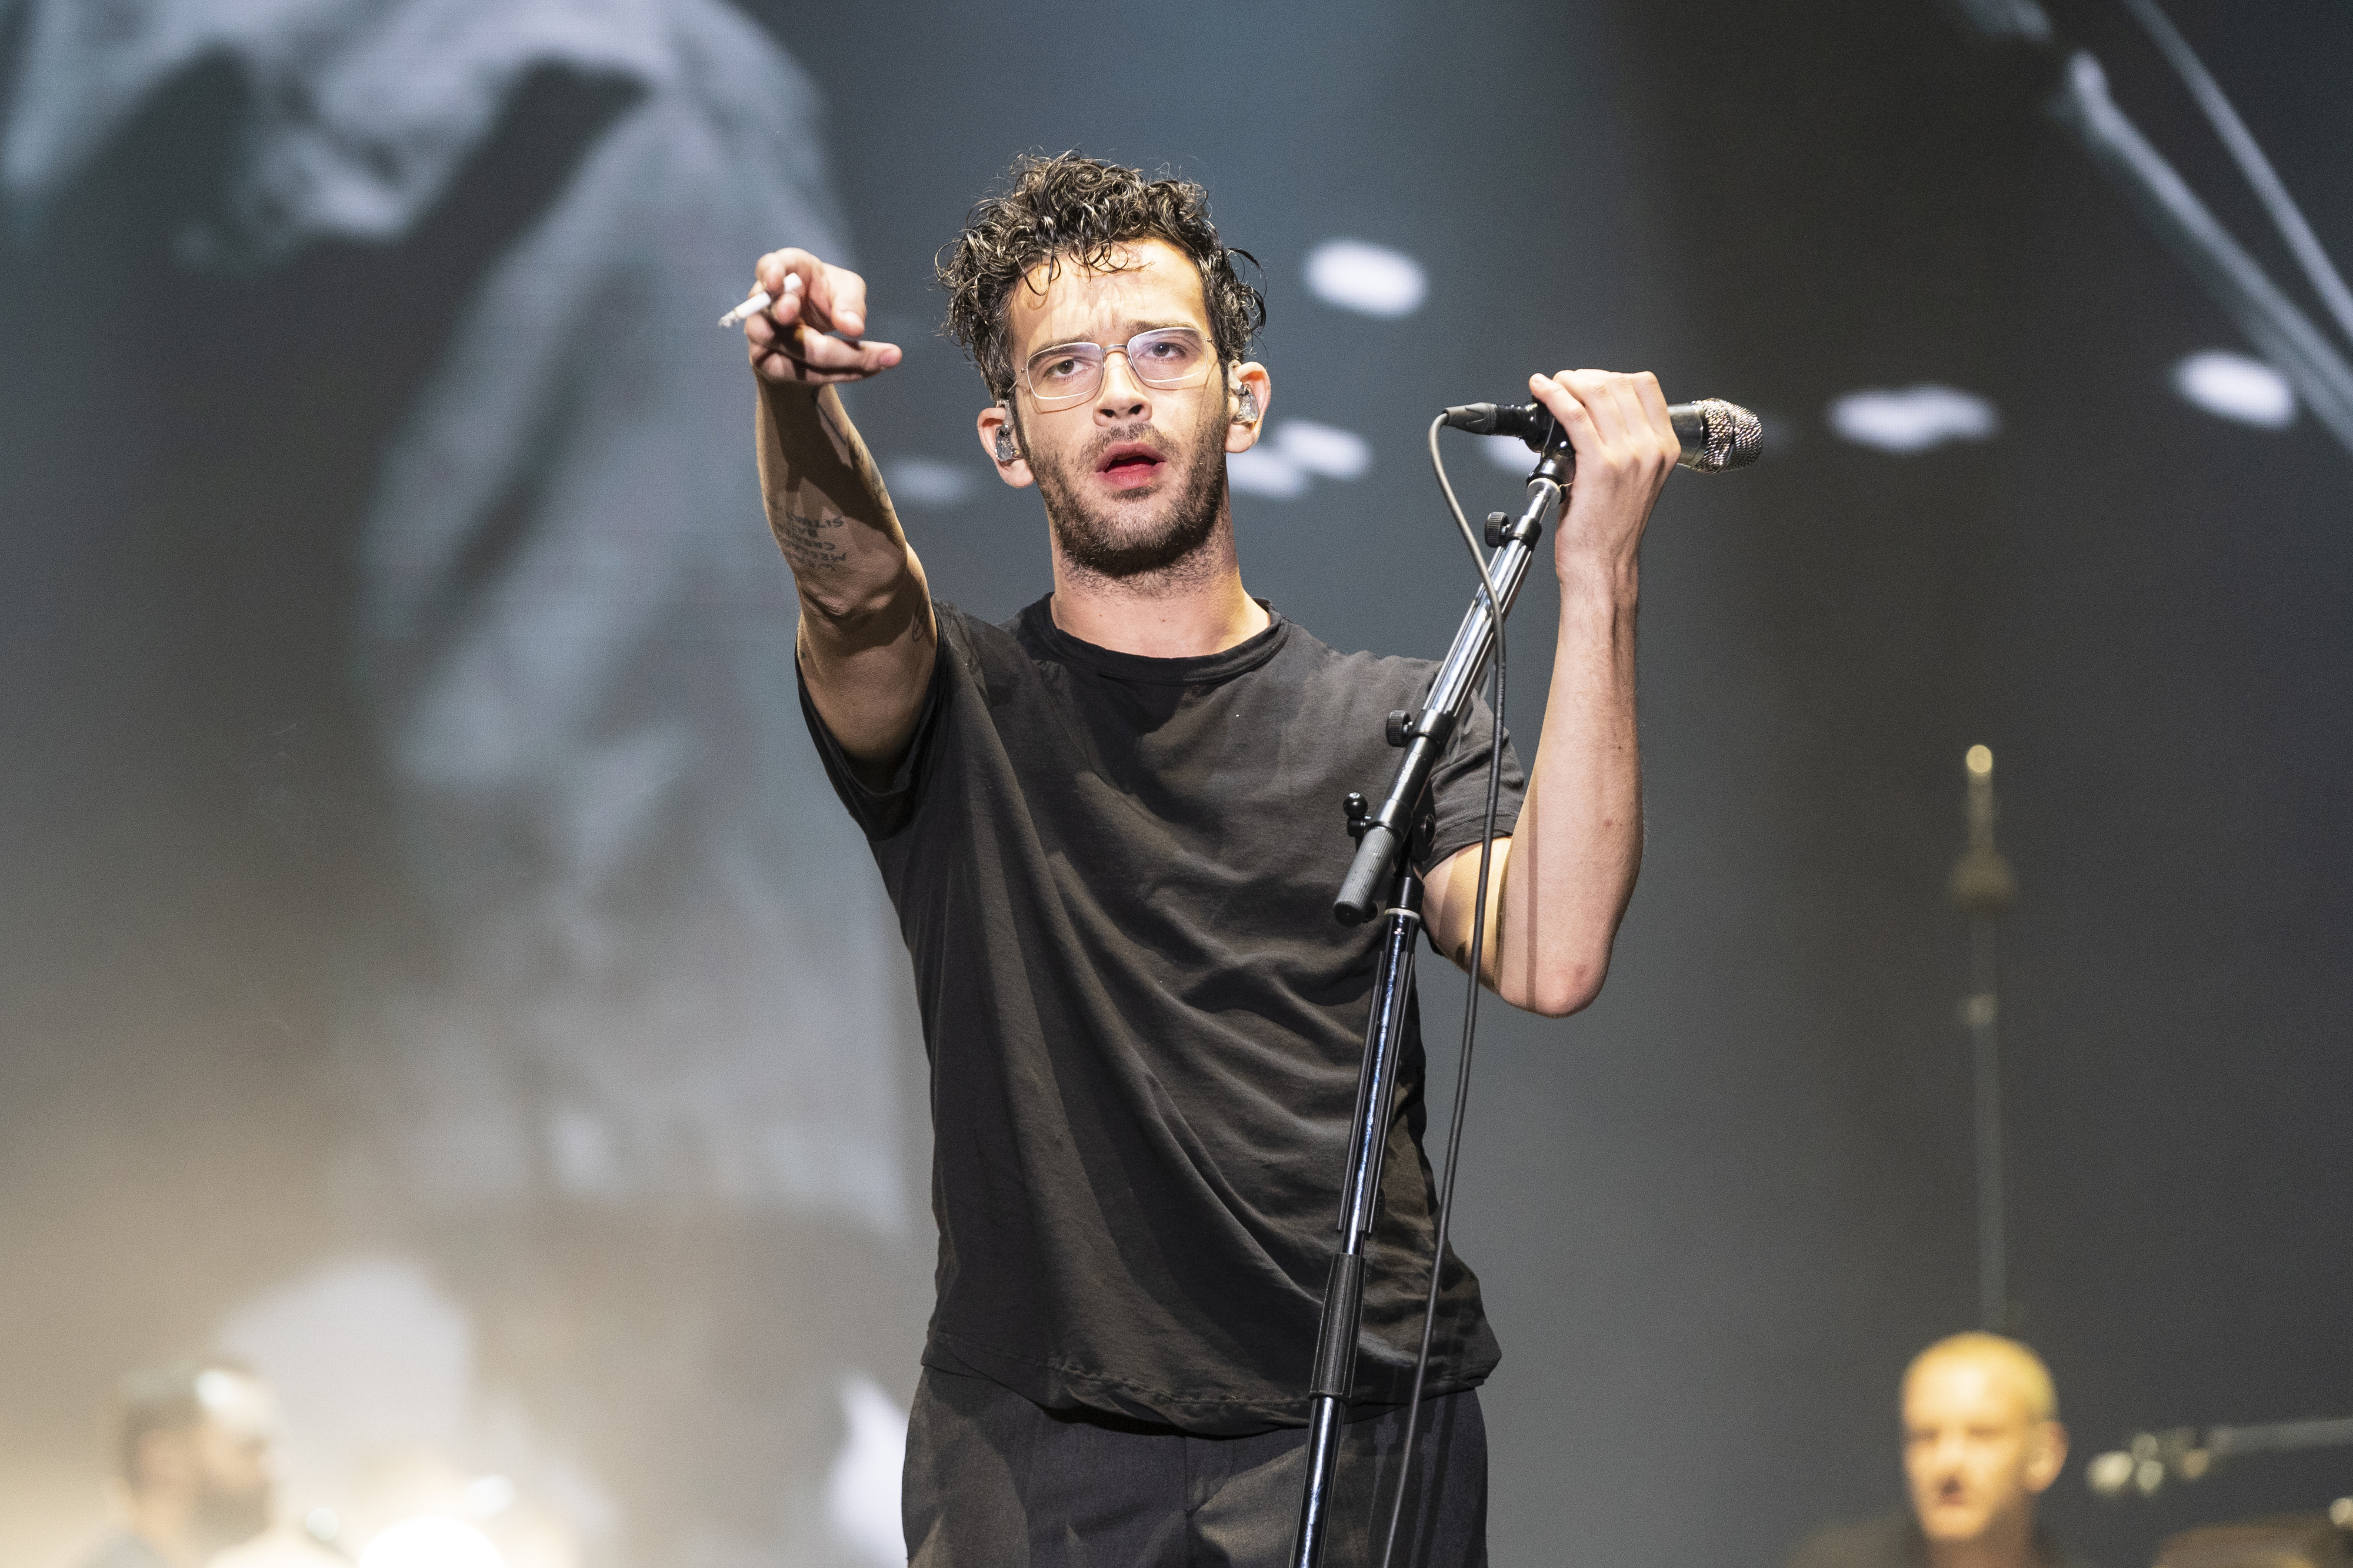 Matty Healy performs on stage, wearing a casual black outfit and holding a microphone, with a band member visible in the background